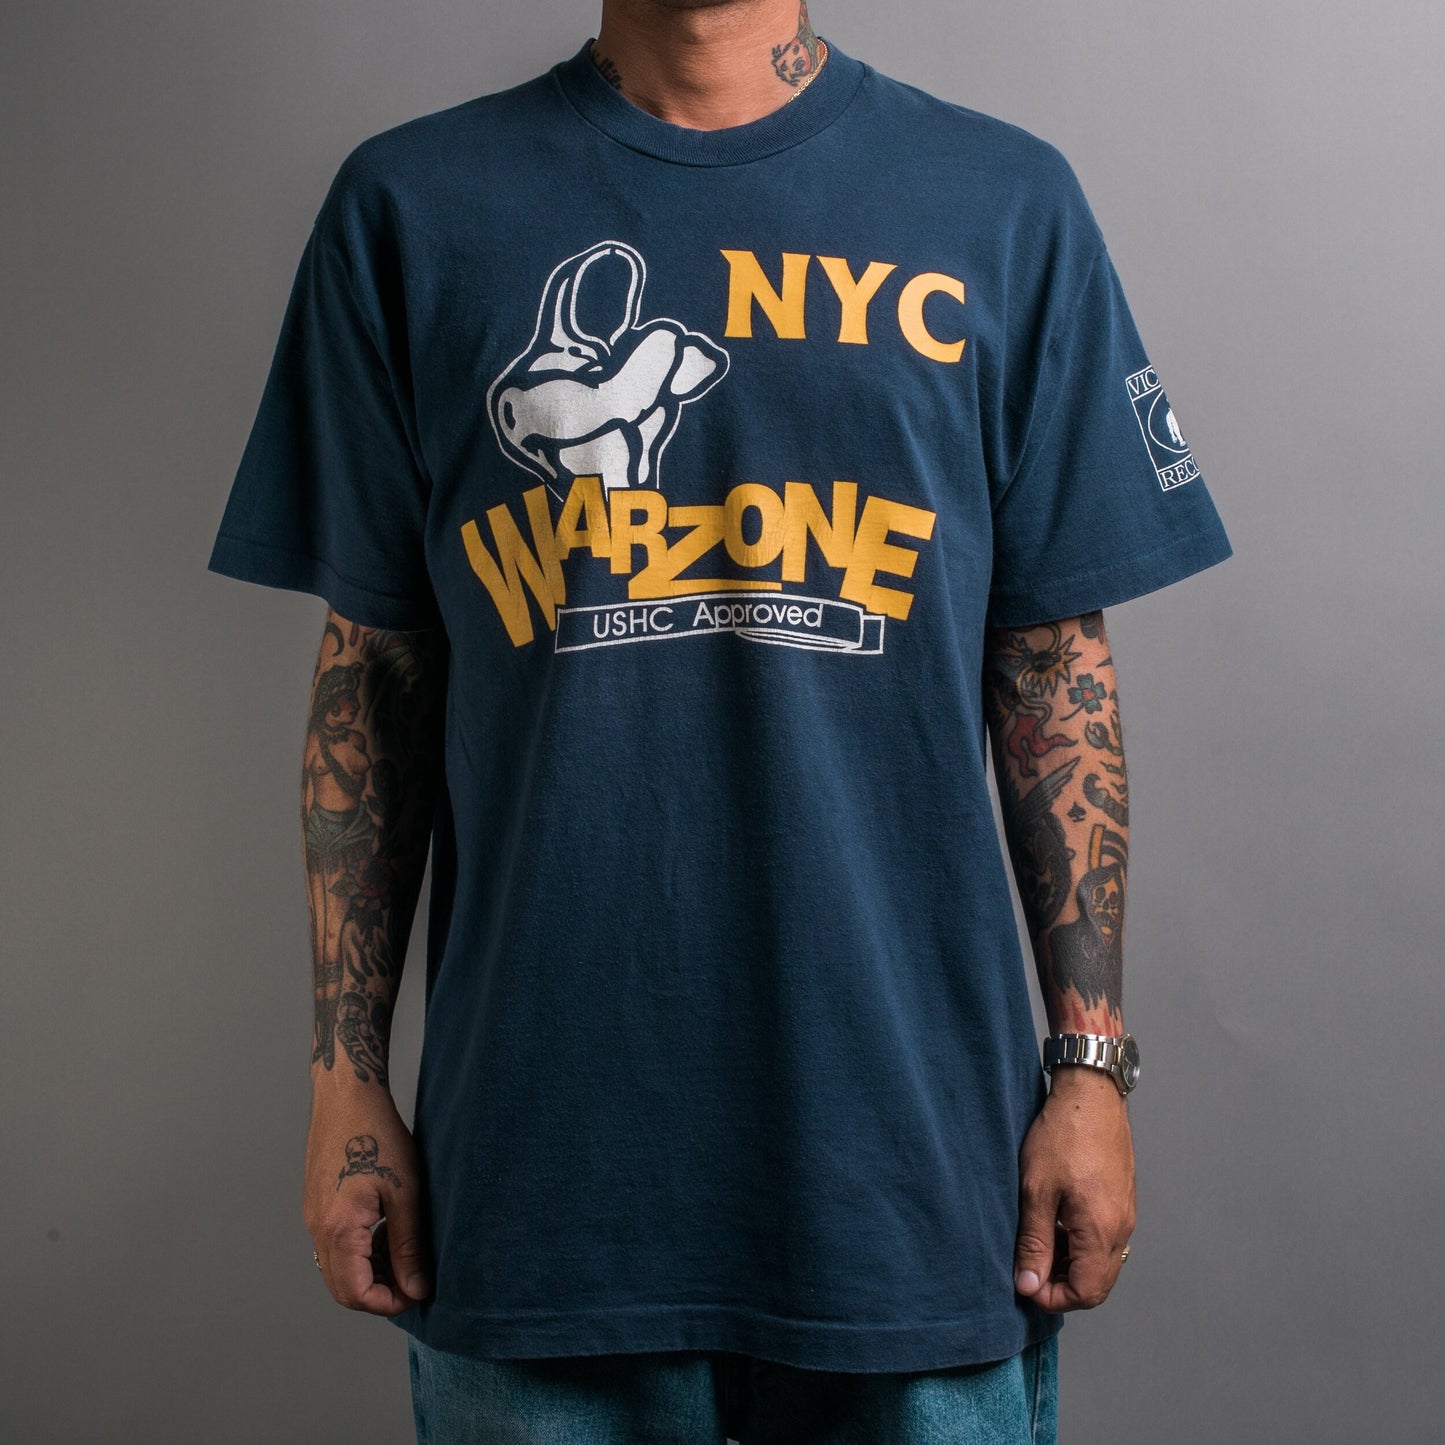 Vintage 90’s Warzone Frontier T-Shirt